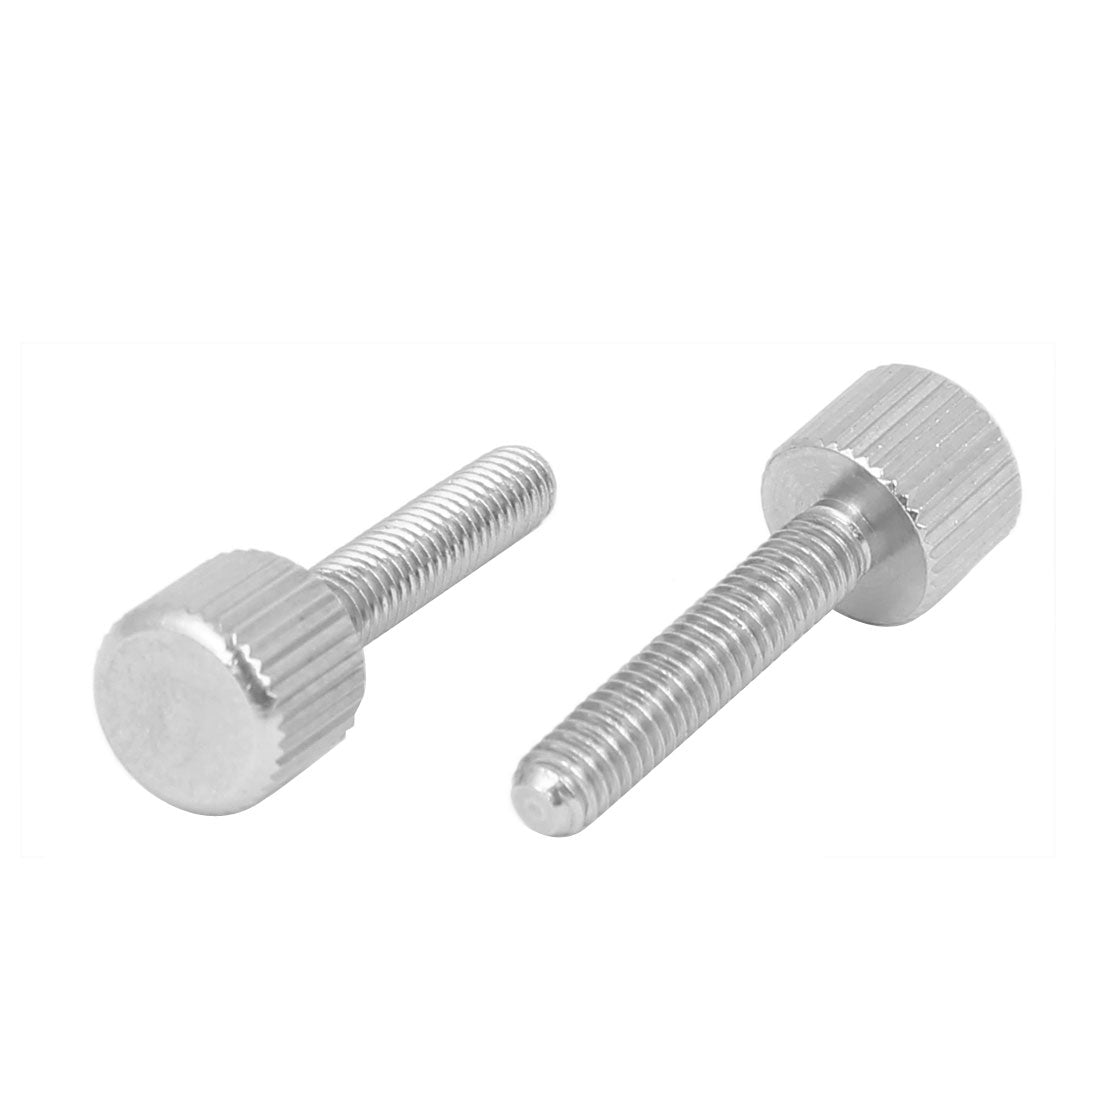 uxcell Uxcell Computer PC Case Stainless Steel Flat Head Knurled Thumb Screw M4 x 20mm 15pcs